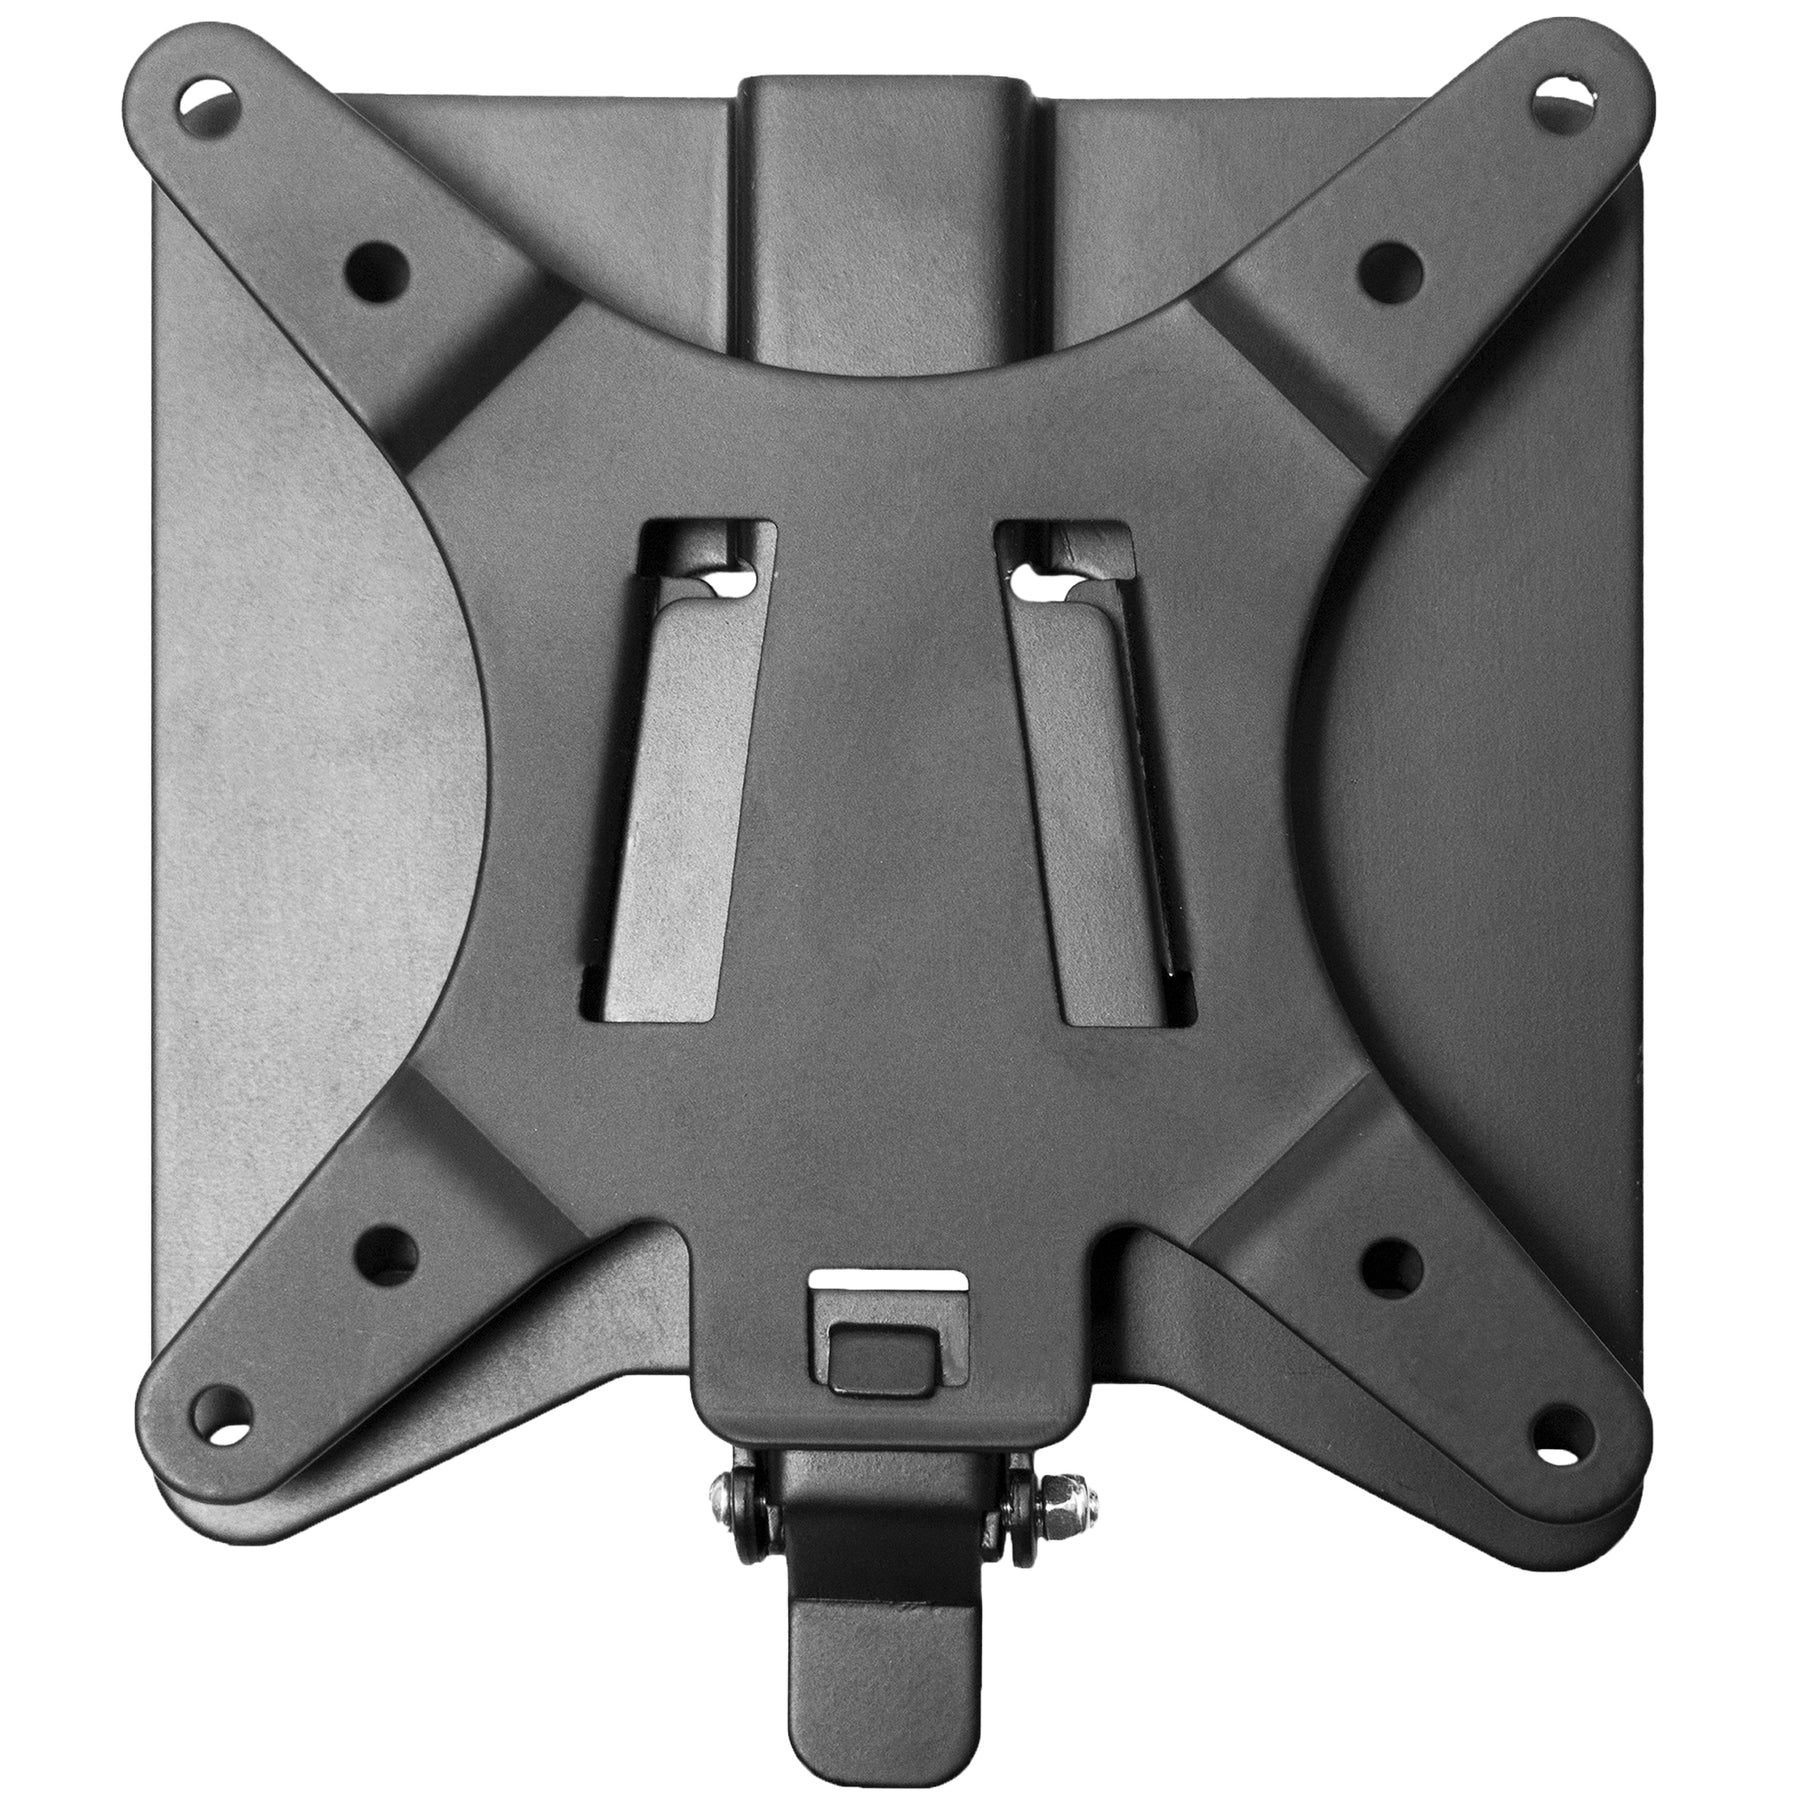 HP LCD Monitor Quick Release Bracket 2